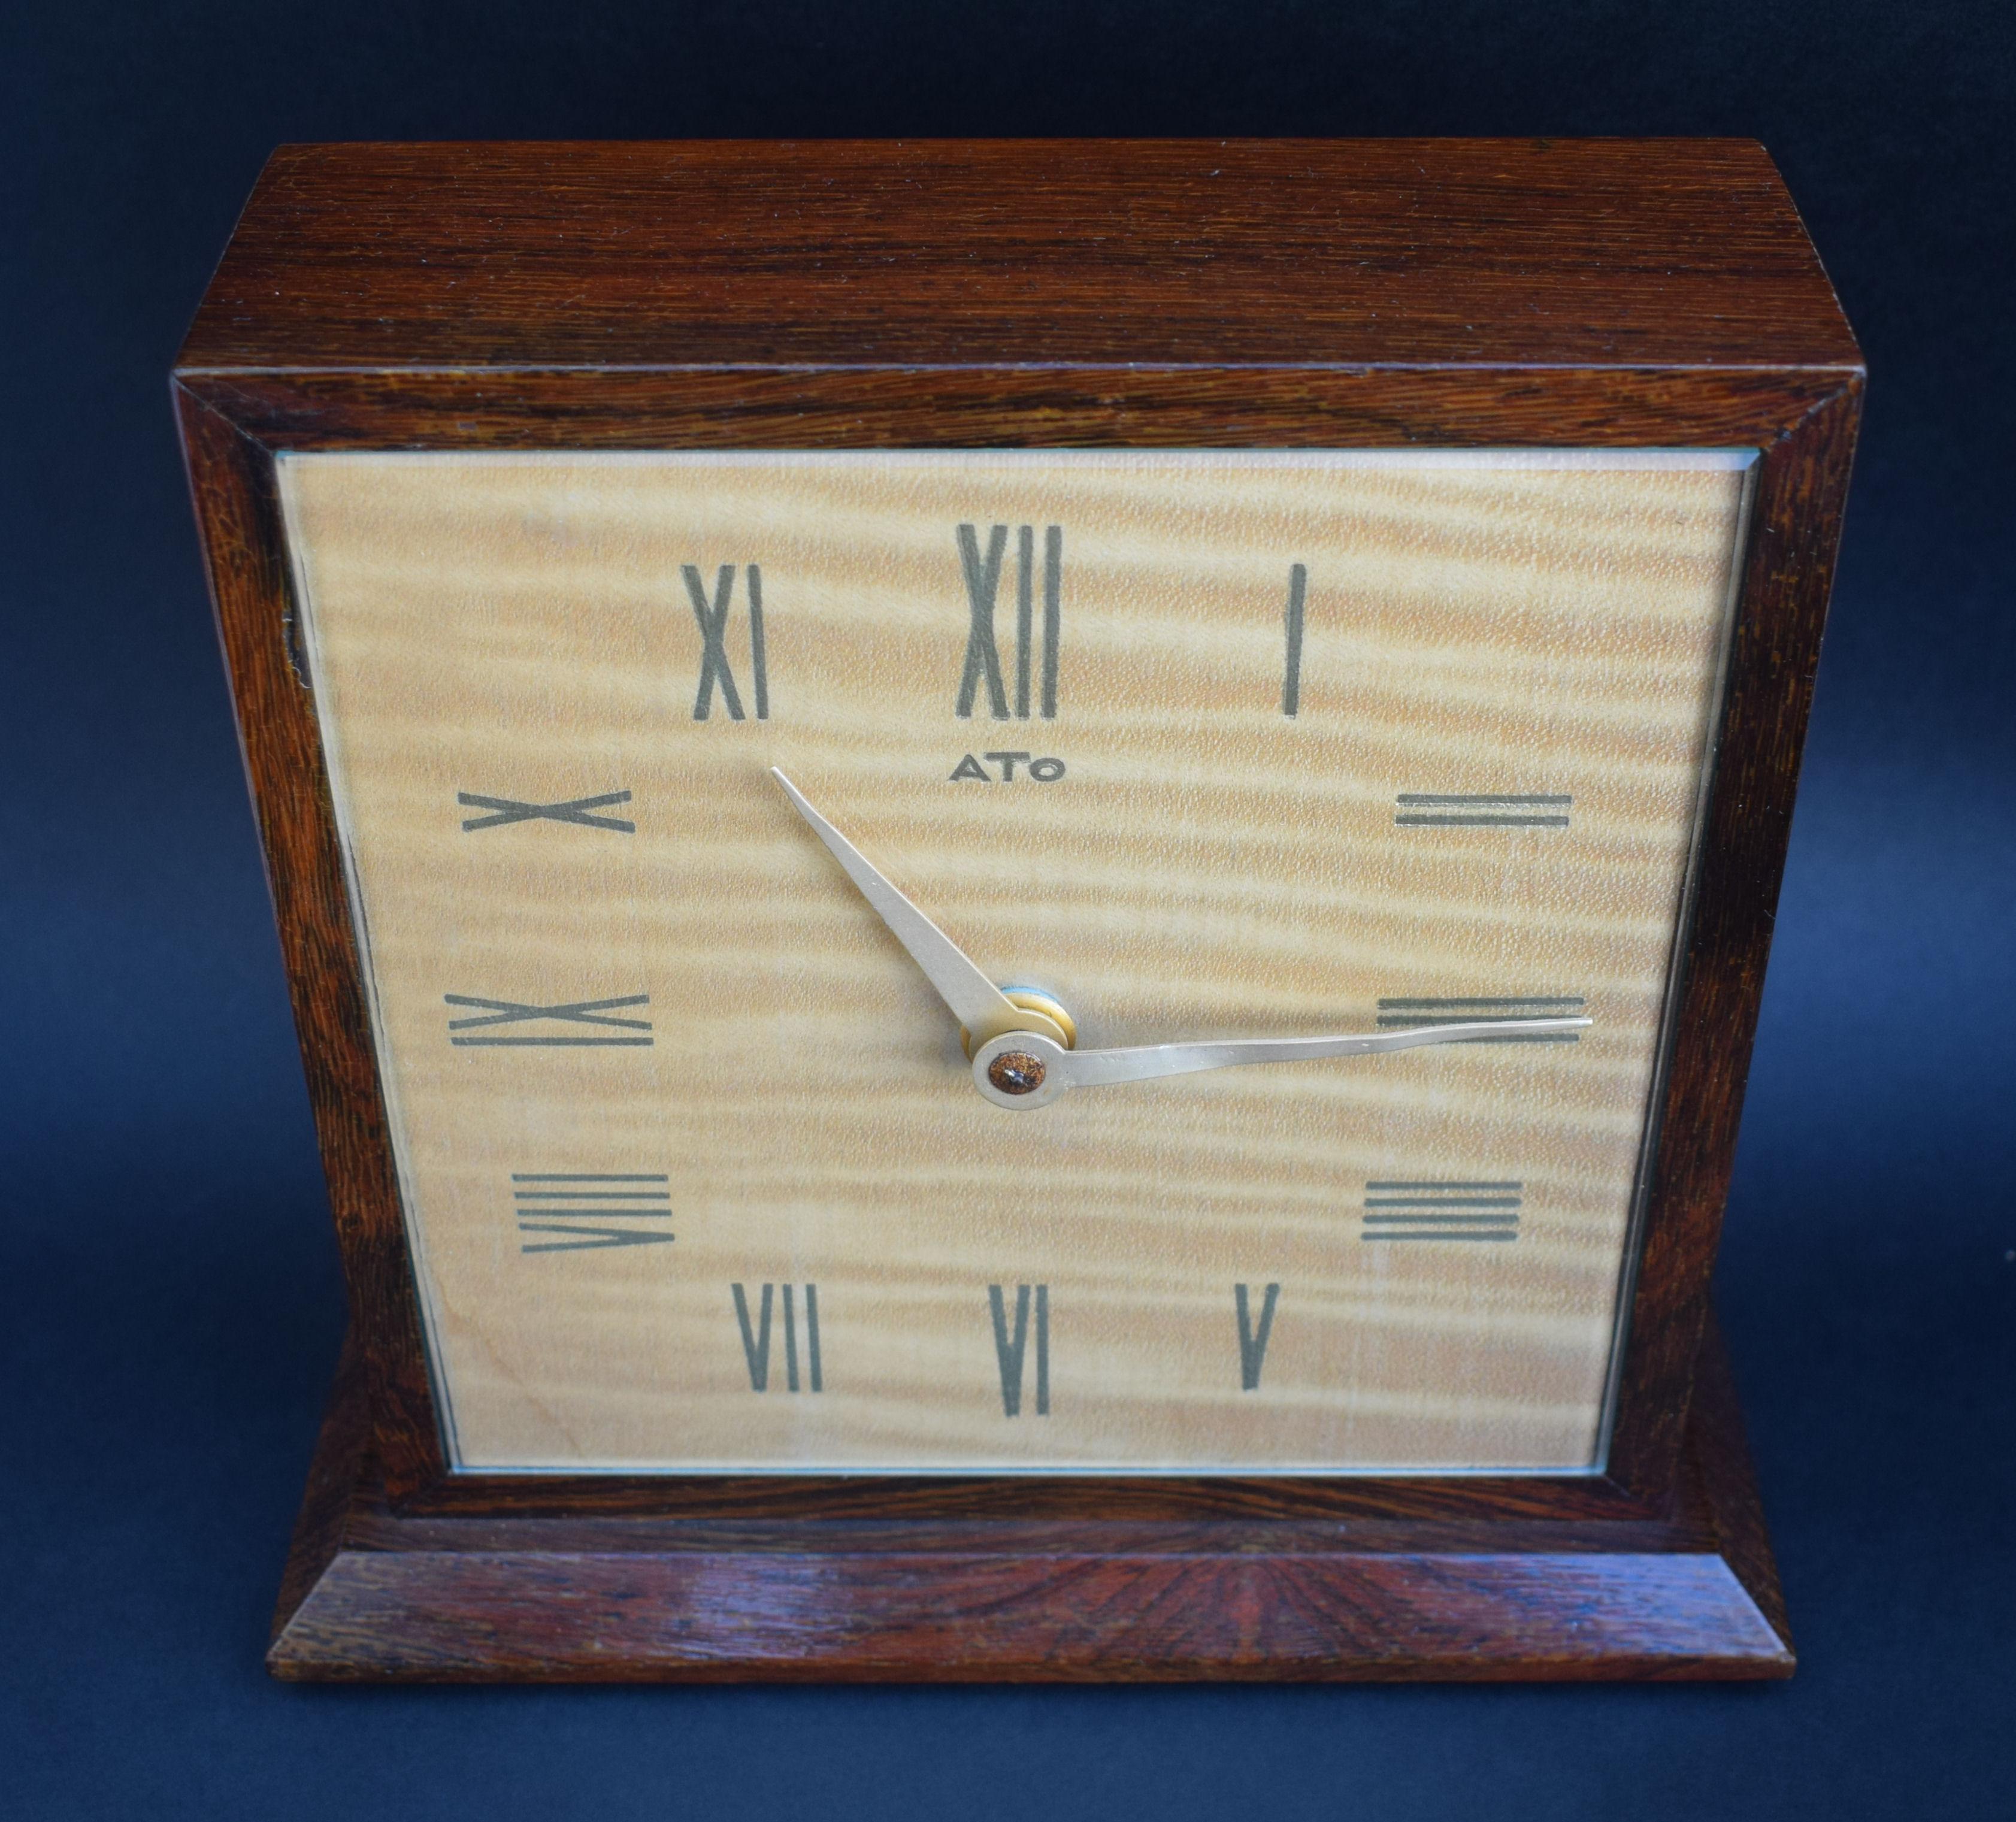 20th Century Art Deco Modernist Mantle Clock by ATO, 1930s